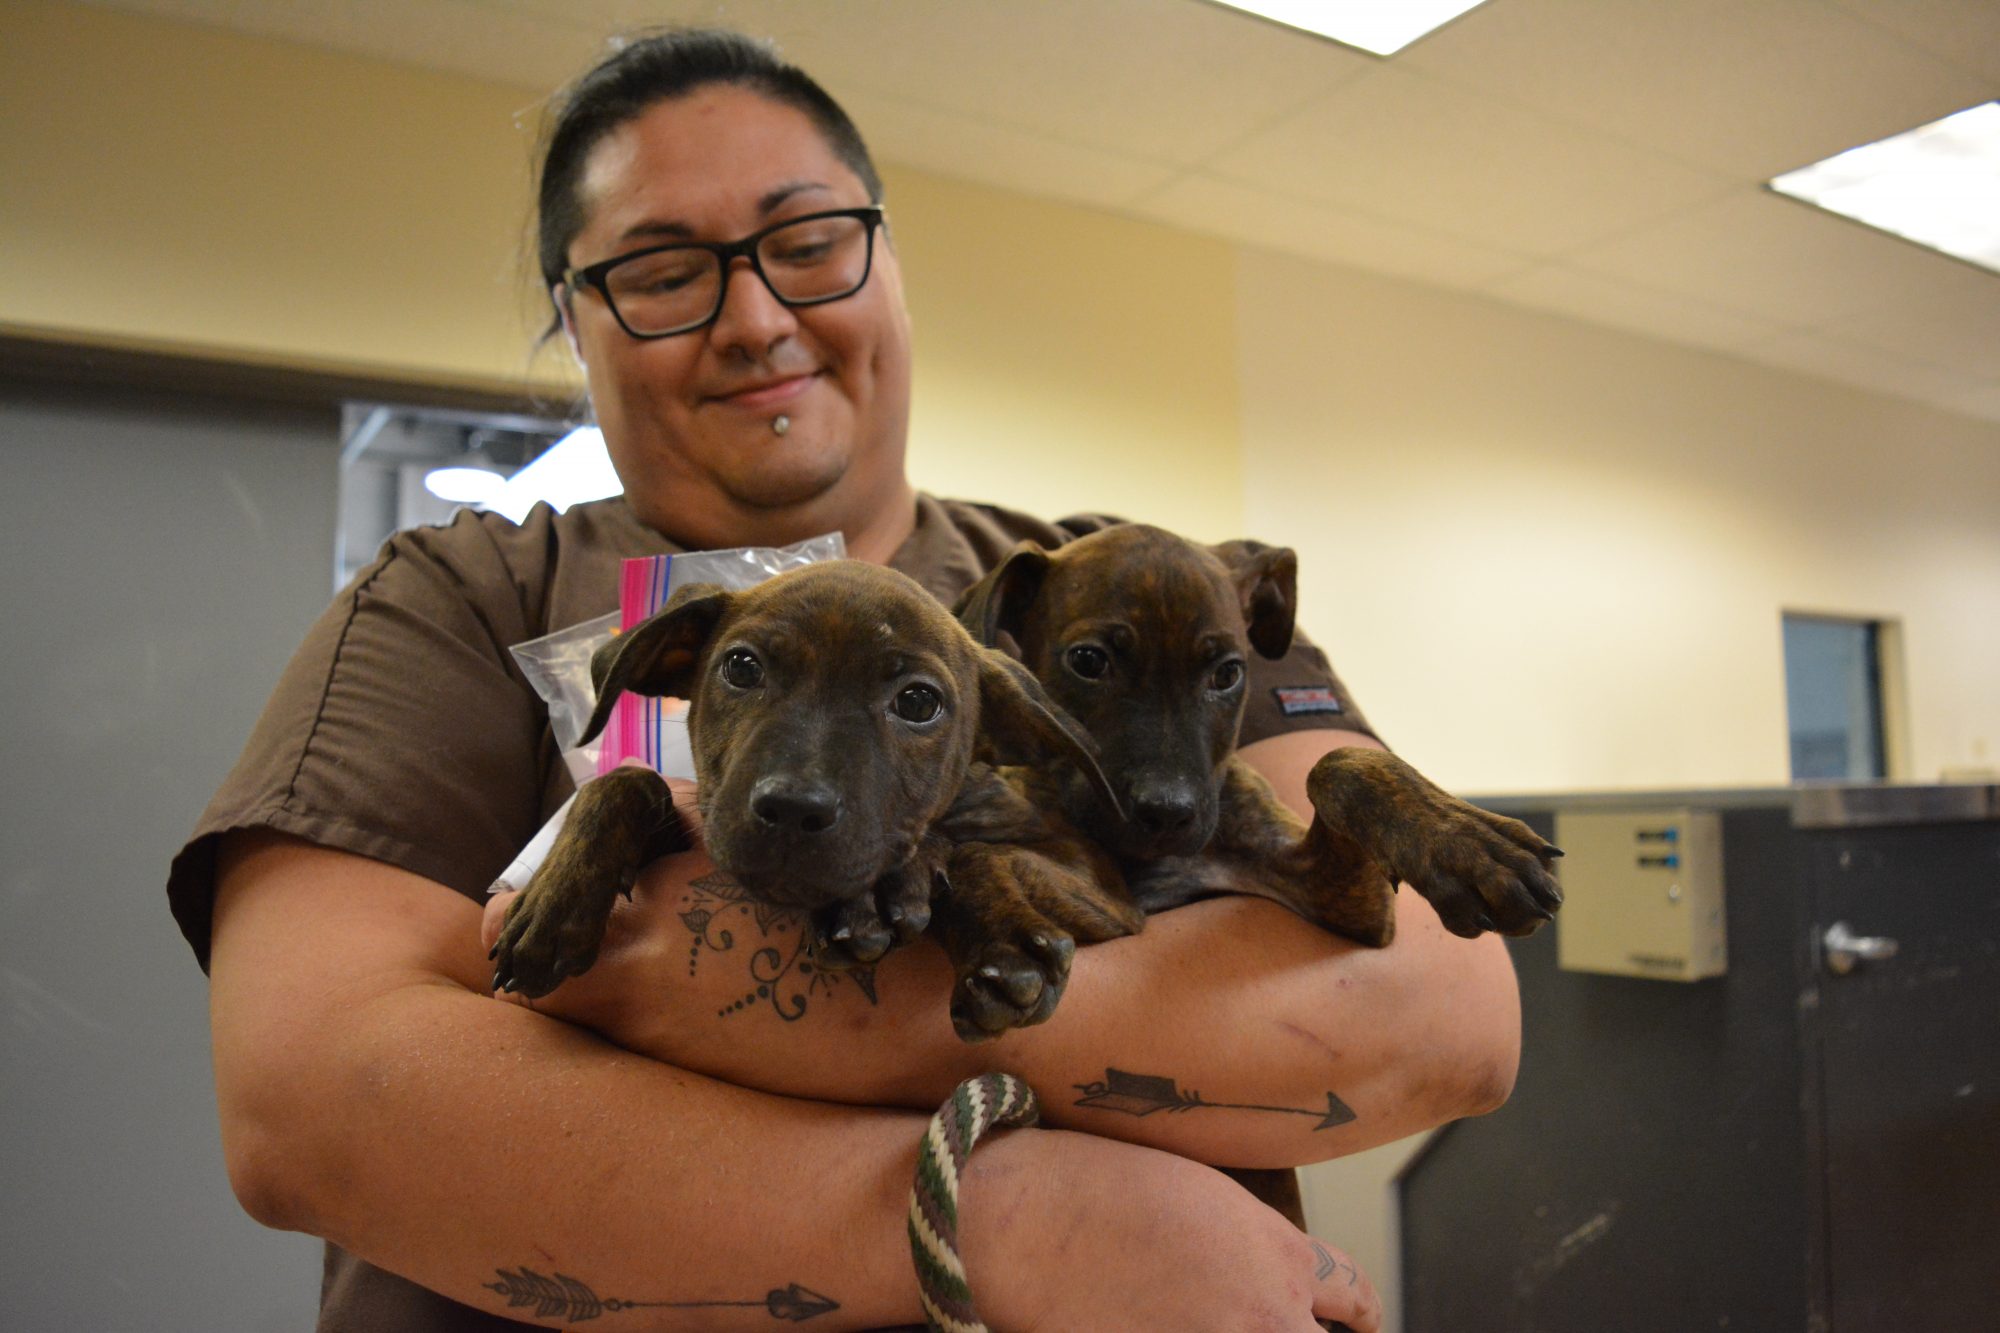 Puppies from Houston arrive at HSMO